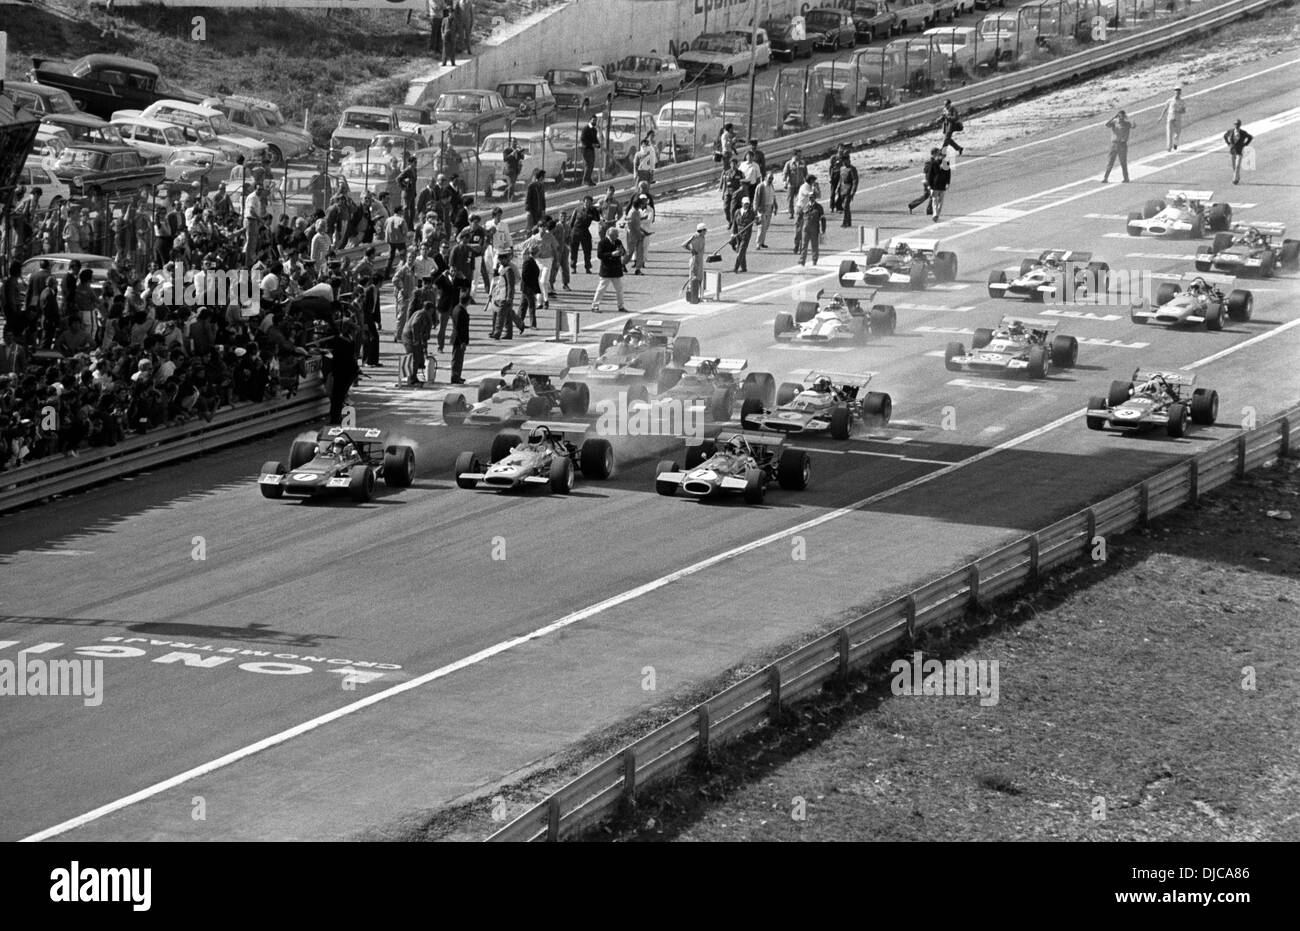 Jackie Stewart leads away in a March 701 at the start of the Spanish GP, Jarama, Spain 19 April 1970. Stock Photo